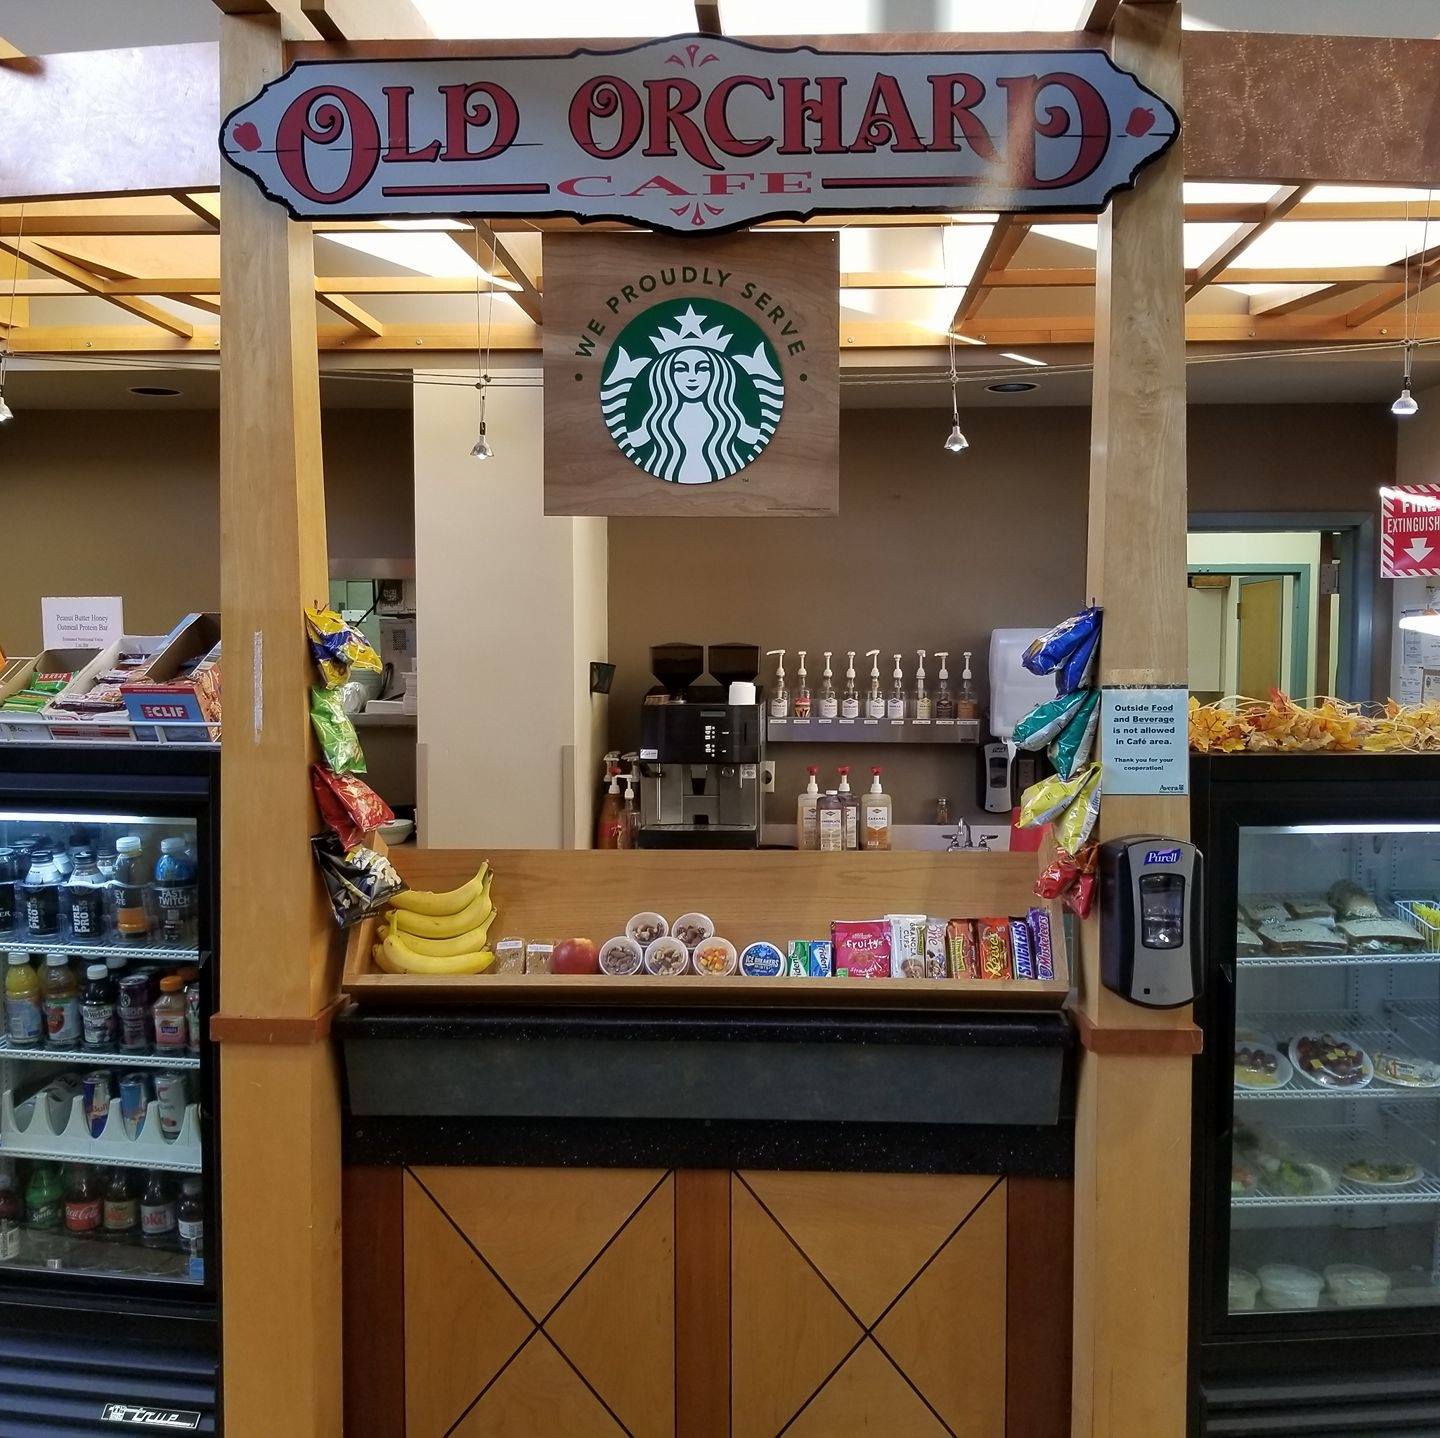 Old Orchard Cafe